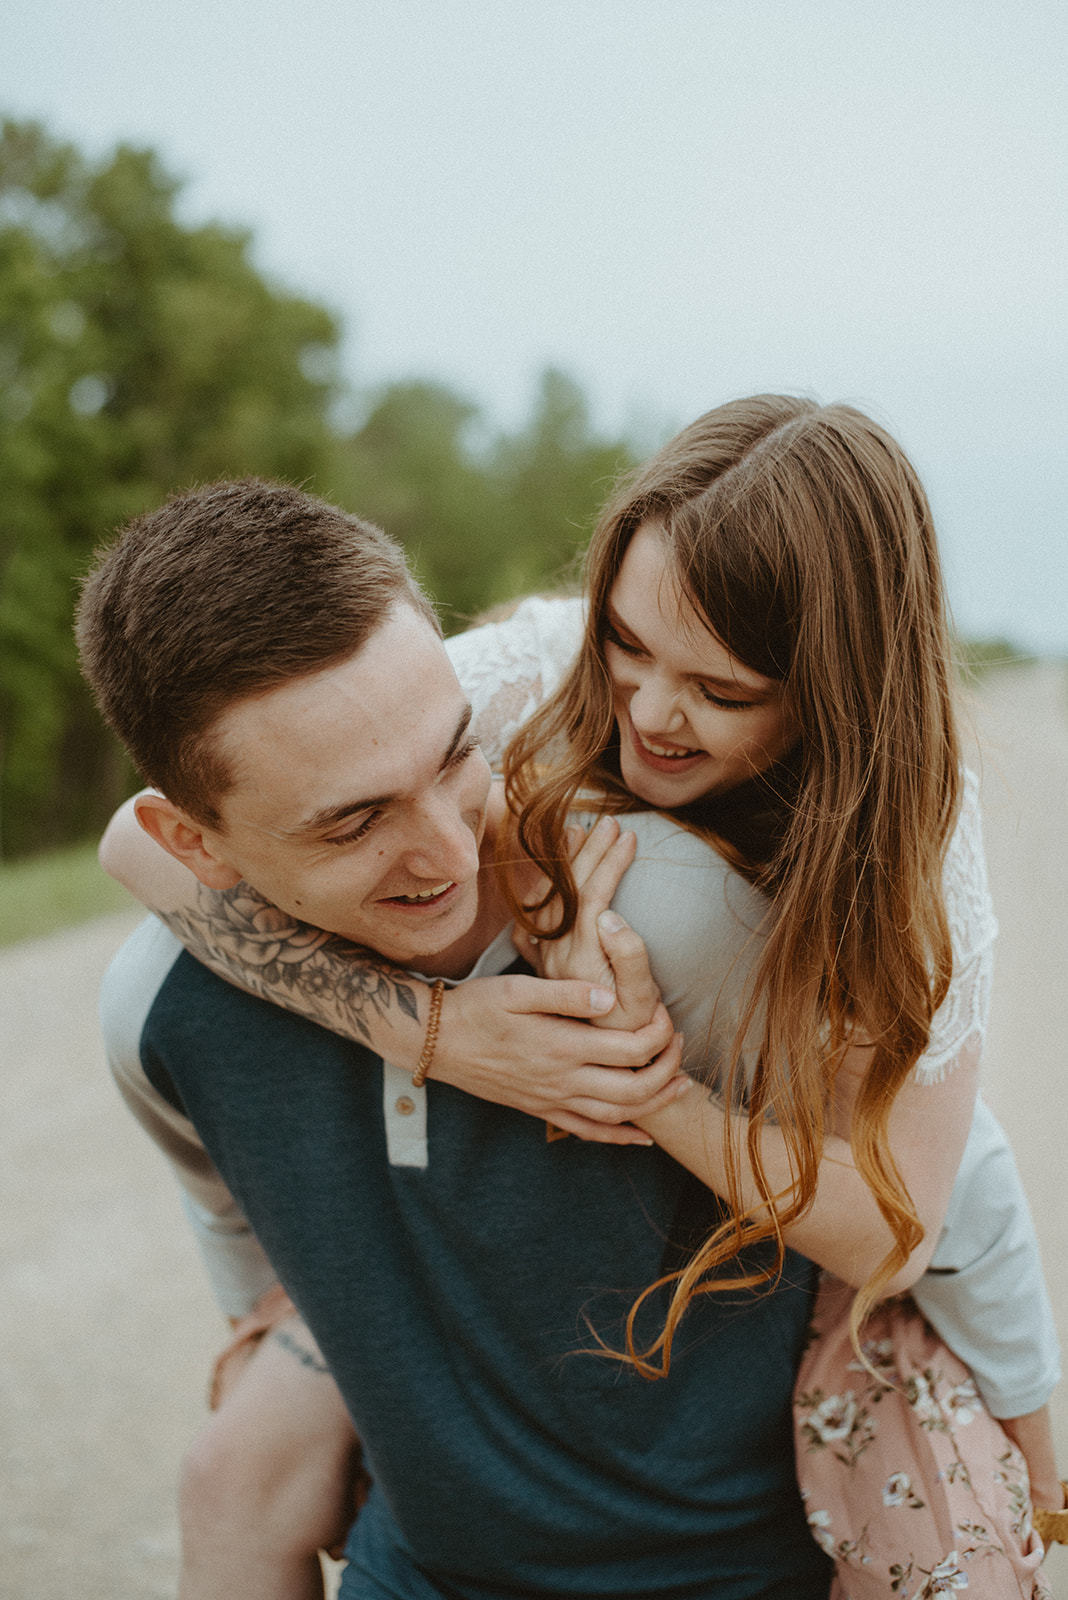 Engagement session outfit tips from professional photographer, Jessica Kaitlyn